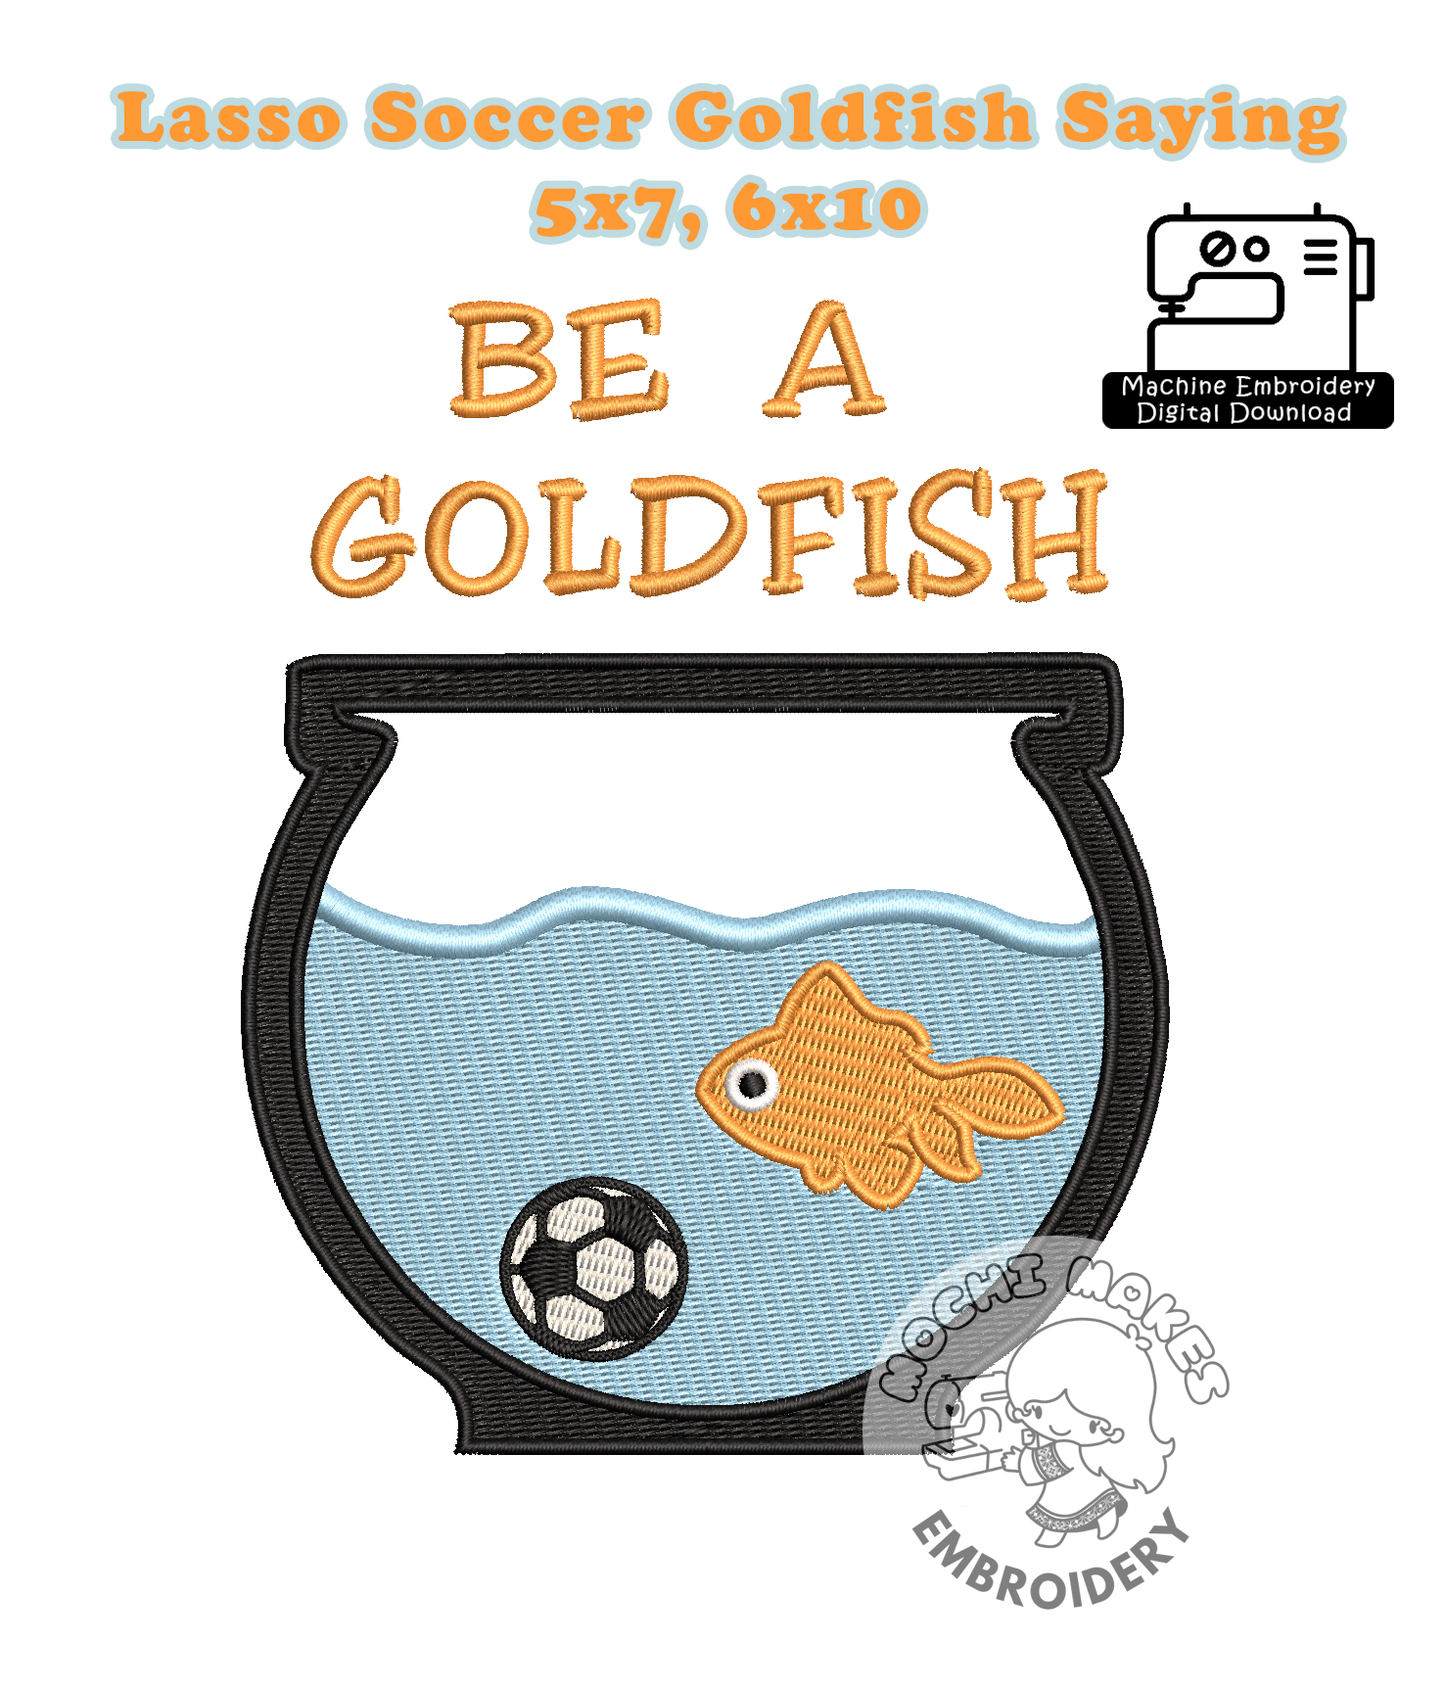 Ted Lasso Soccer Be a Goldfish Machine Embroidery Digital Download Pattern 5x7 6x10 Football DIY Sew Craft